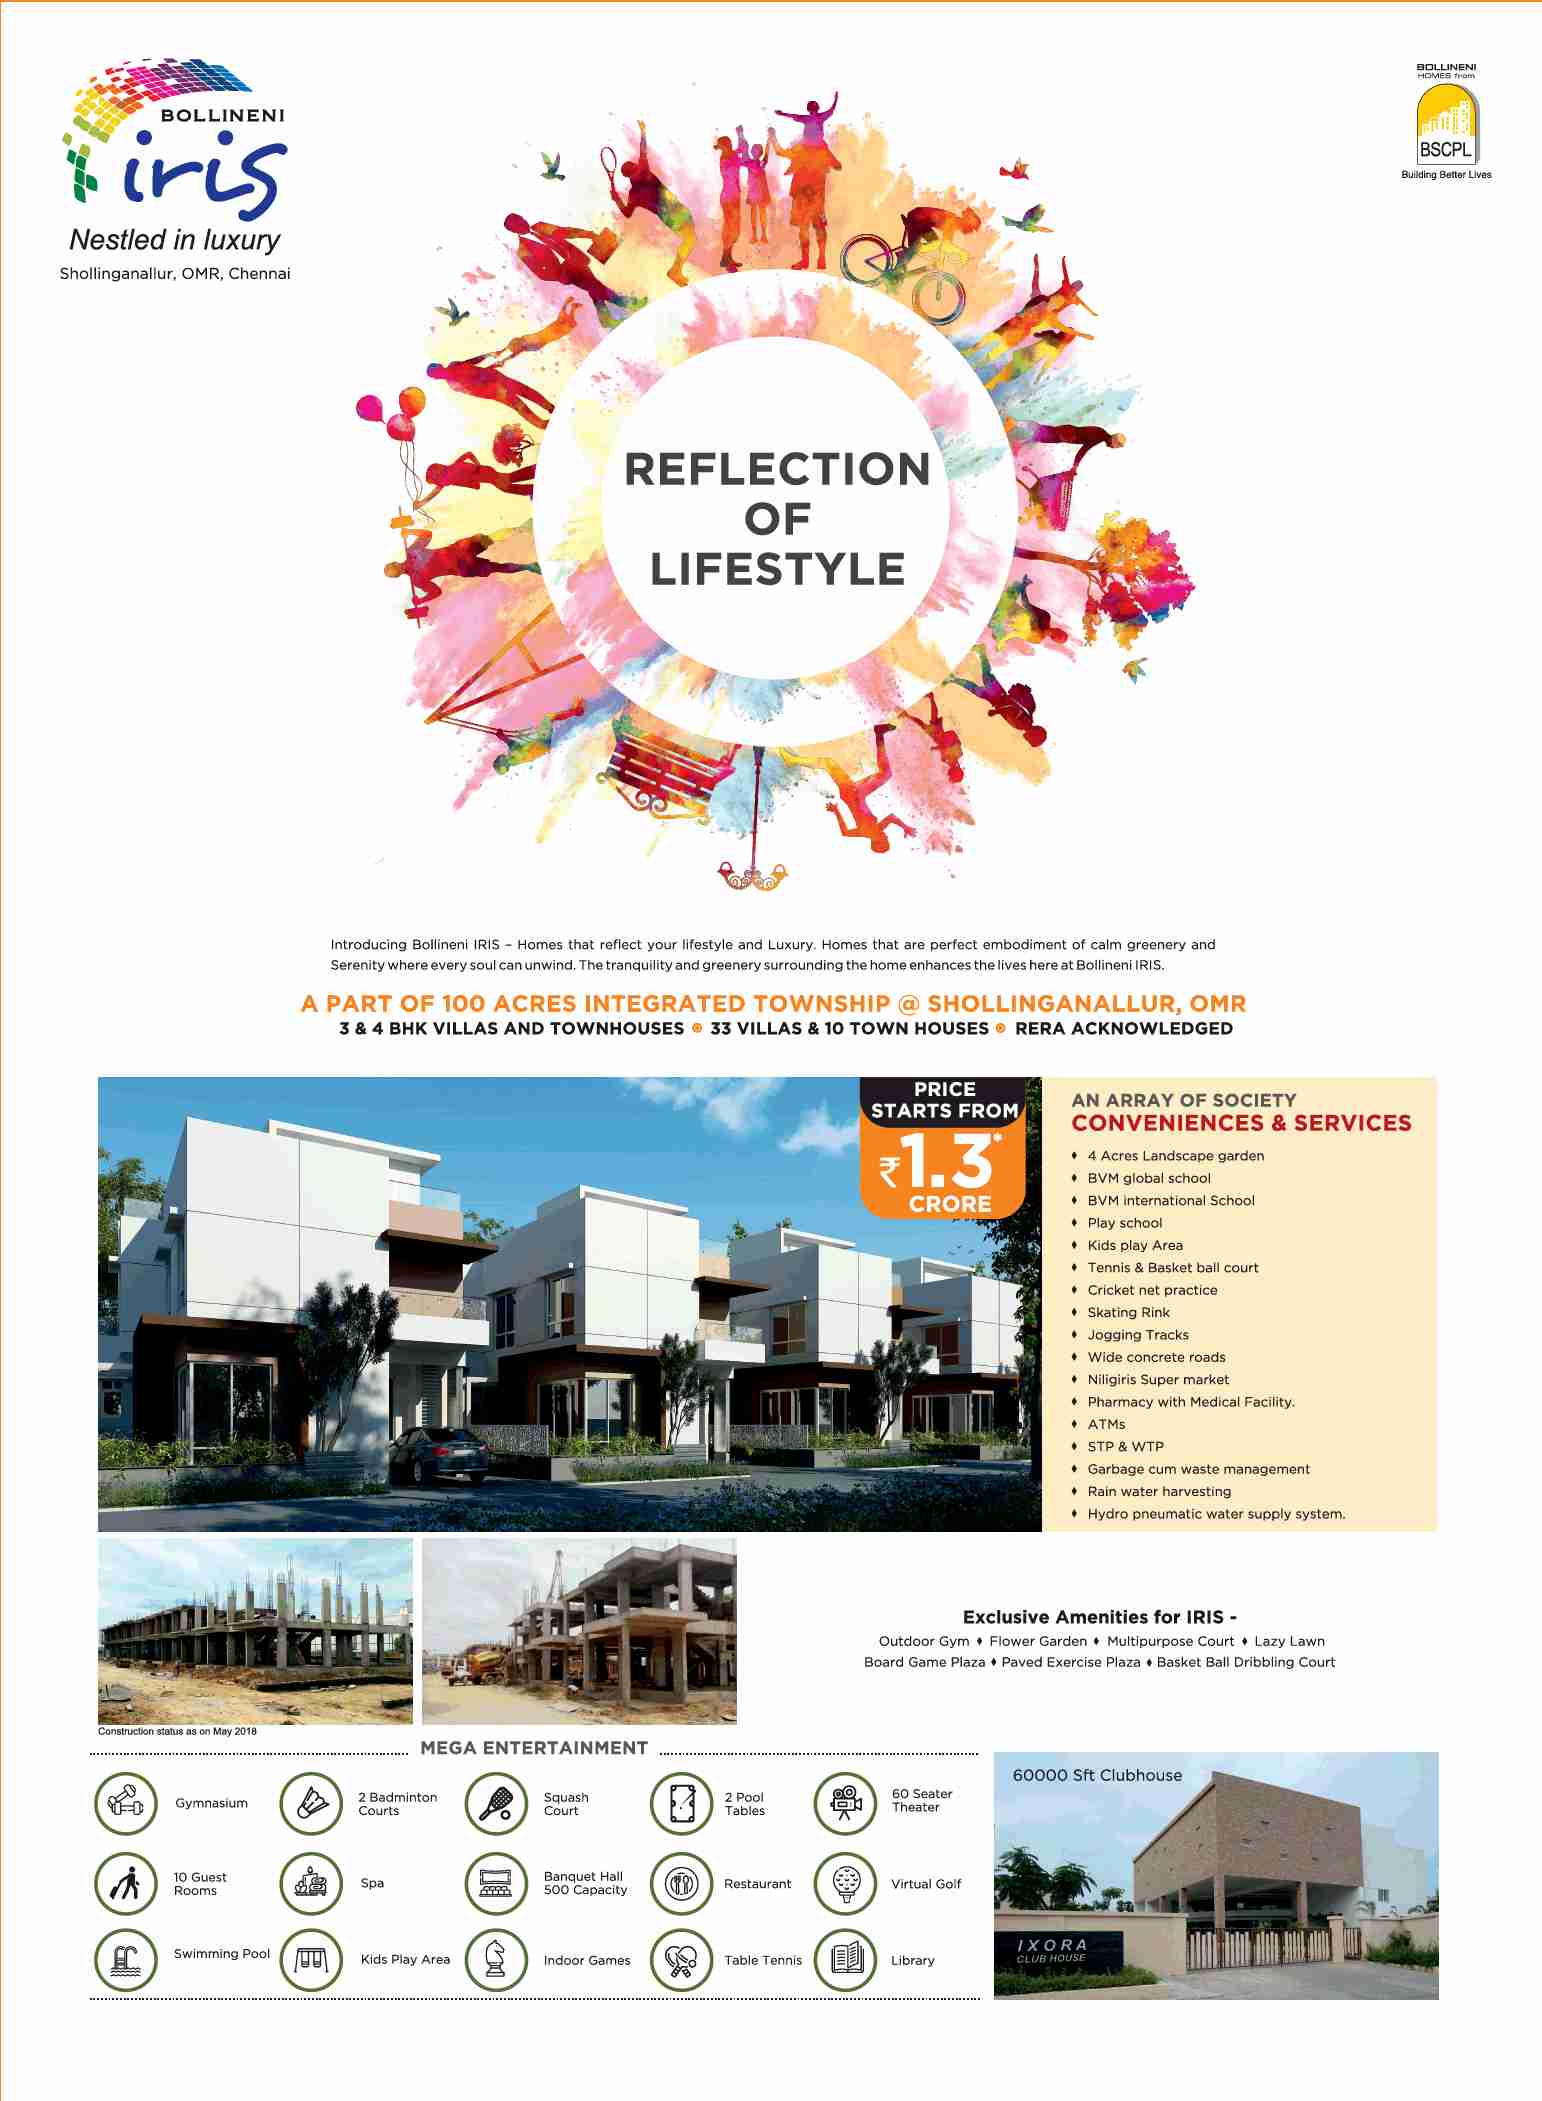 Live in homes that reflect your lifestyle and luxury at BSCPL Bollineni Iris in Chennai Update